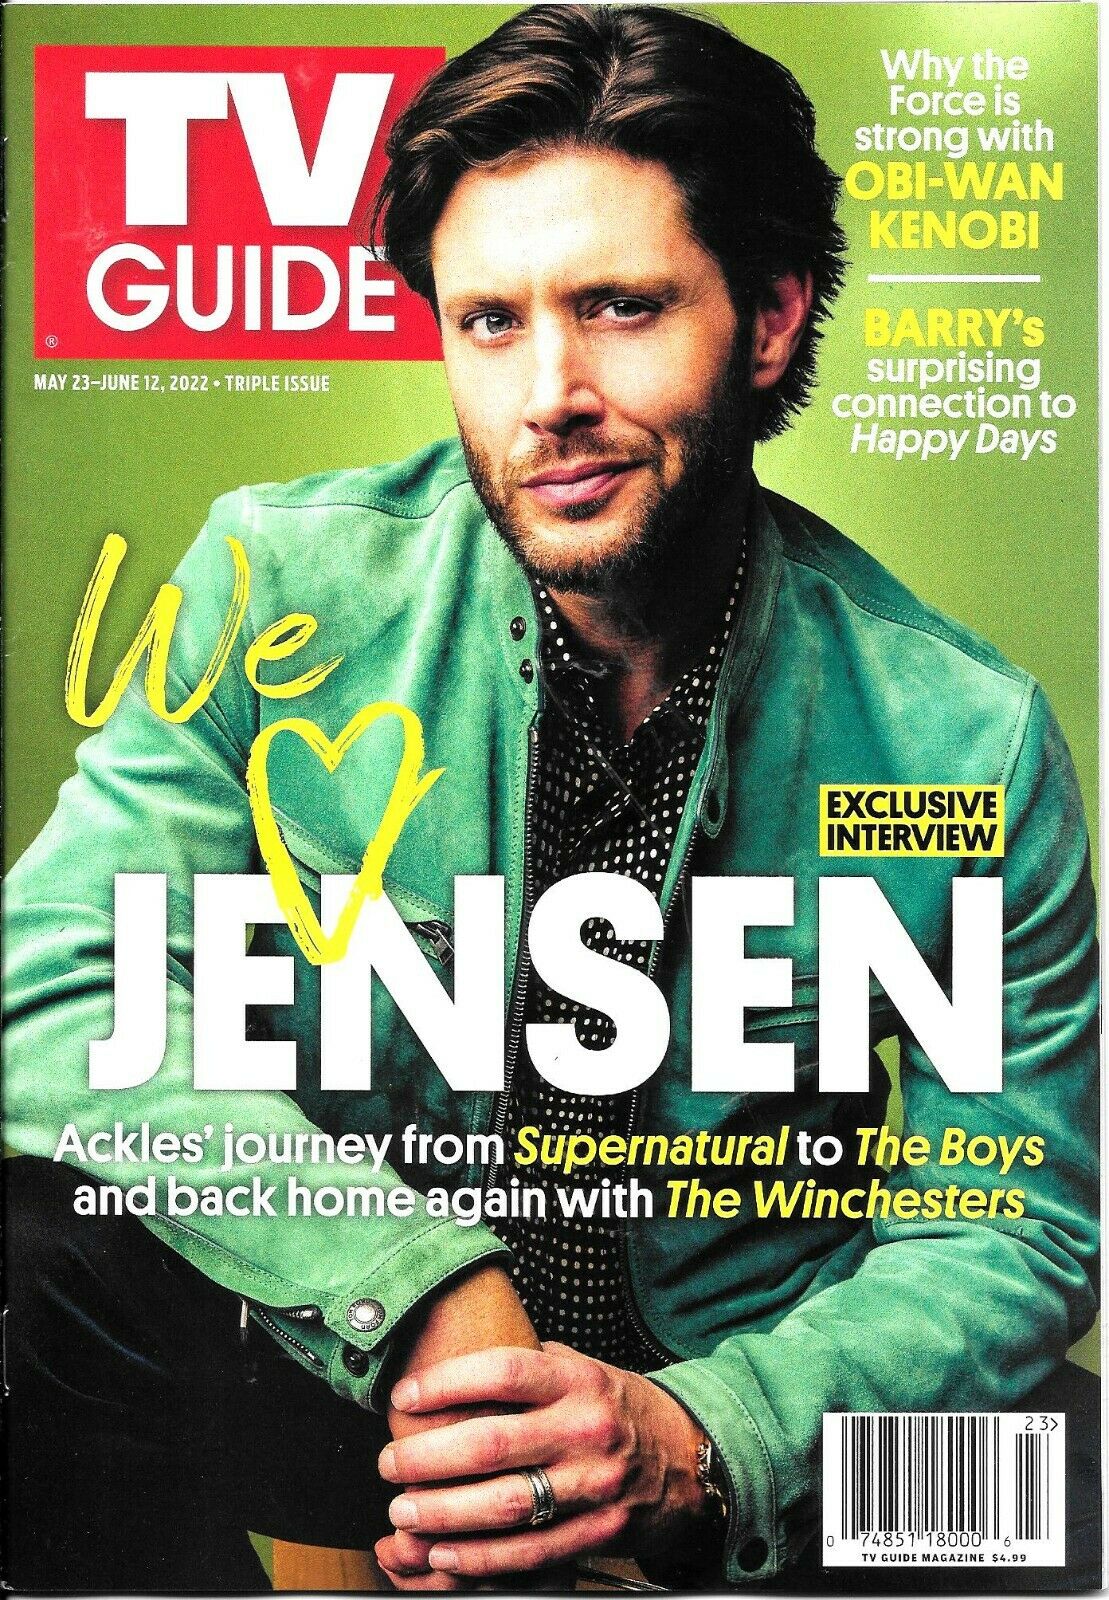 US TV GUIDE May 2022 JENSEN ACKLES THE BOYS THE WINCHESTERS Supernatural